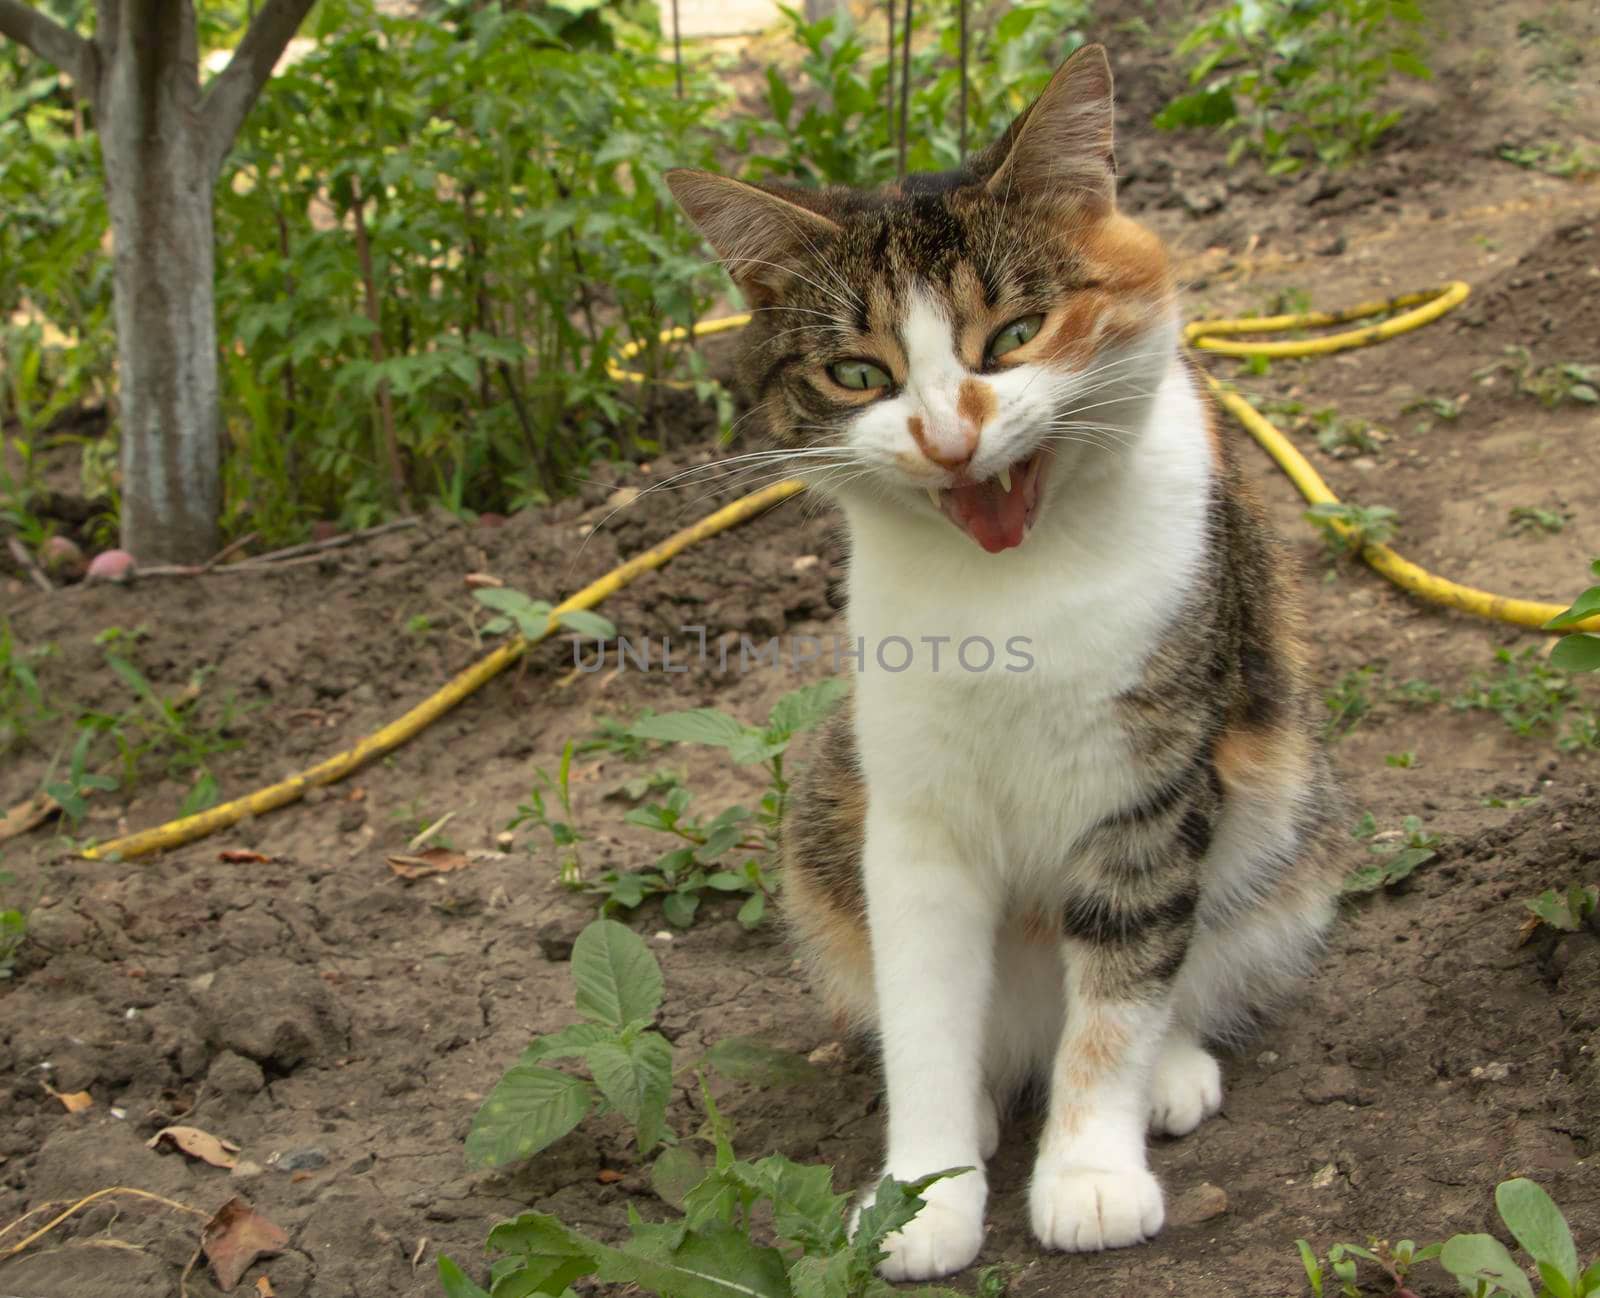 An aggressive cat with an open mouth.